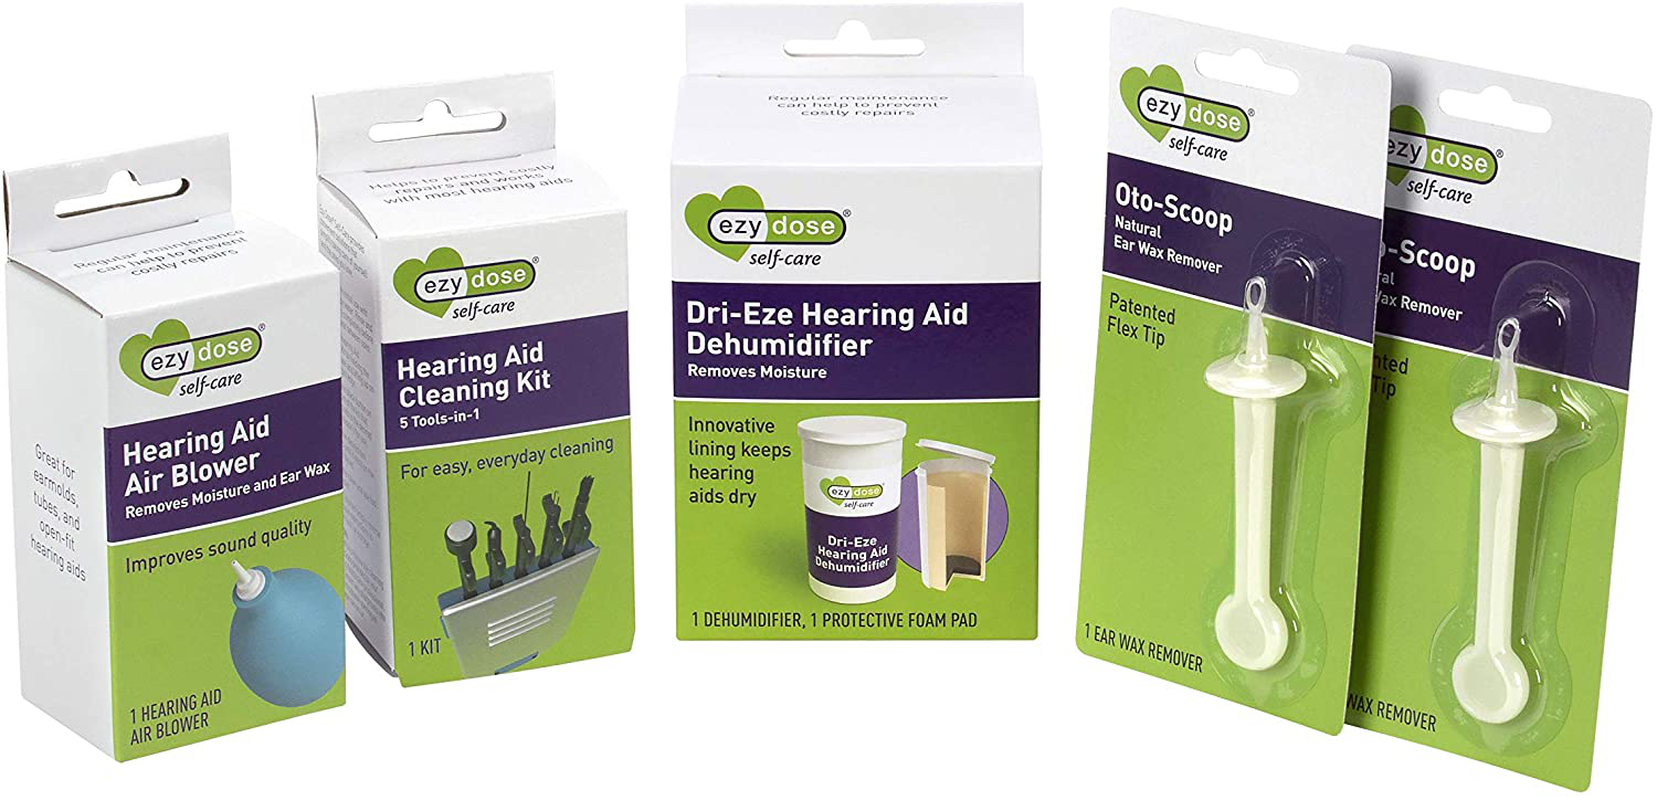 EZY DOSE Hearing Aid Blower | Clears Moisture & Ear Wax | Helps Improve Sound Quality, 1 Count